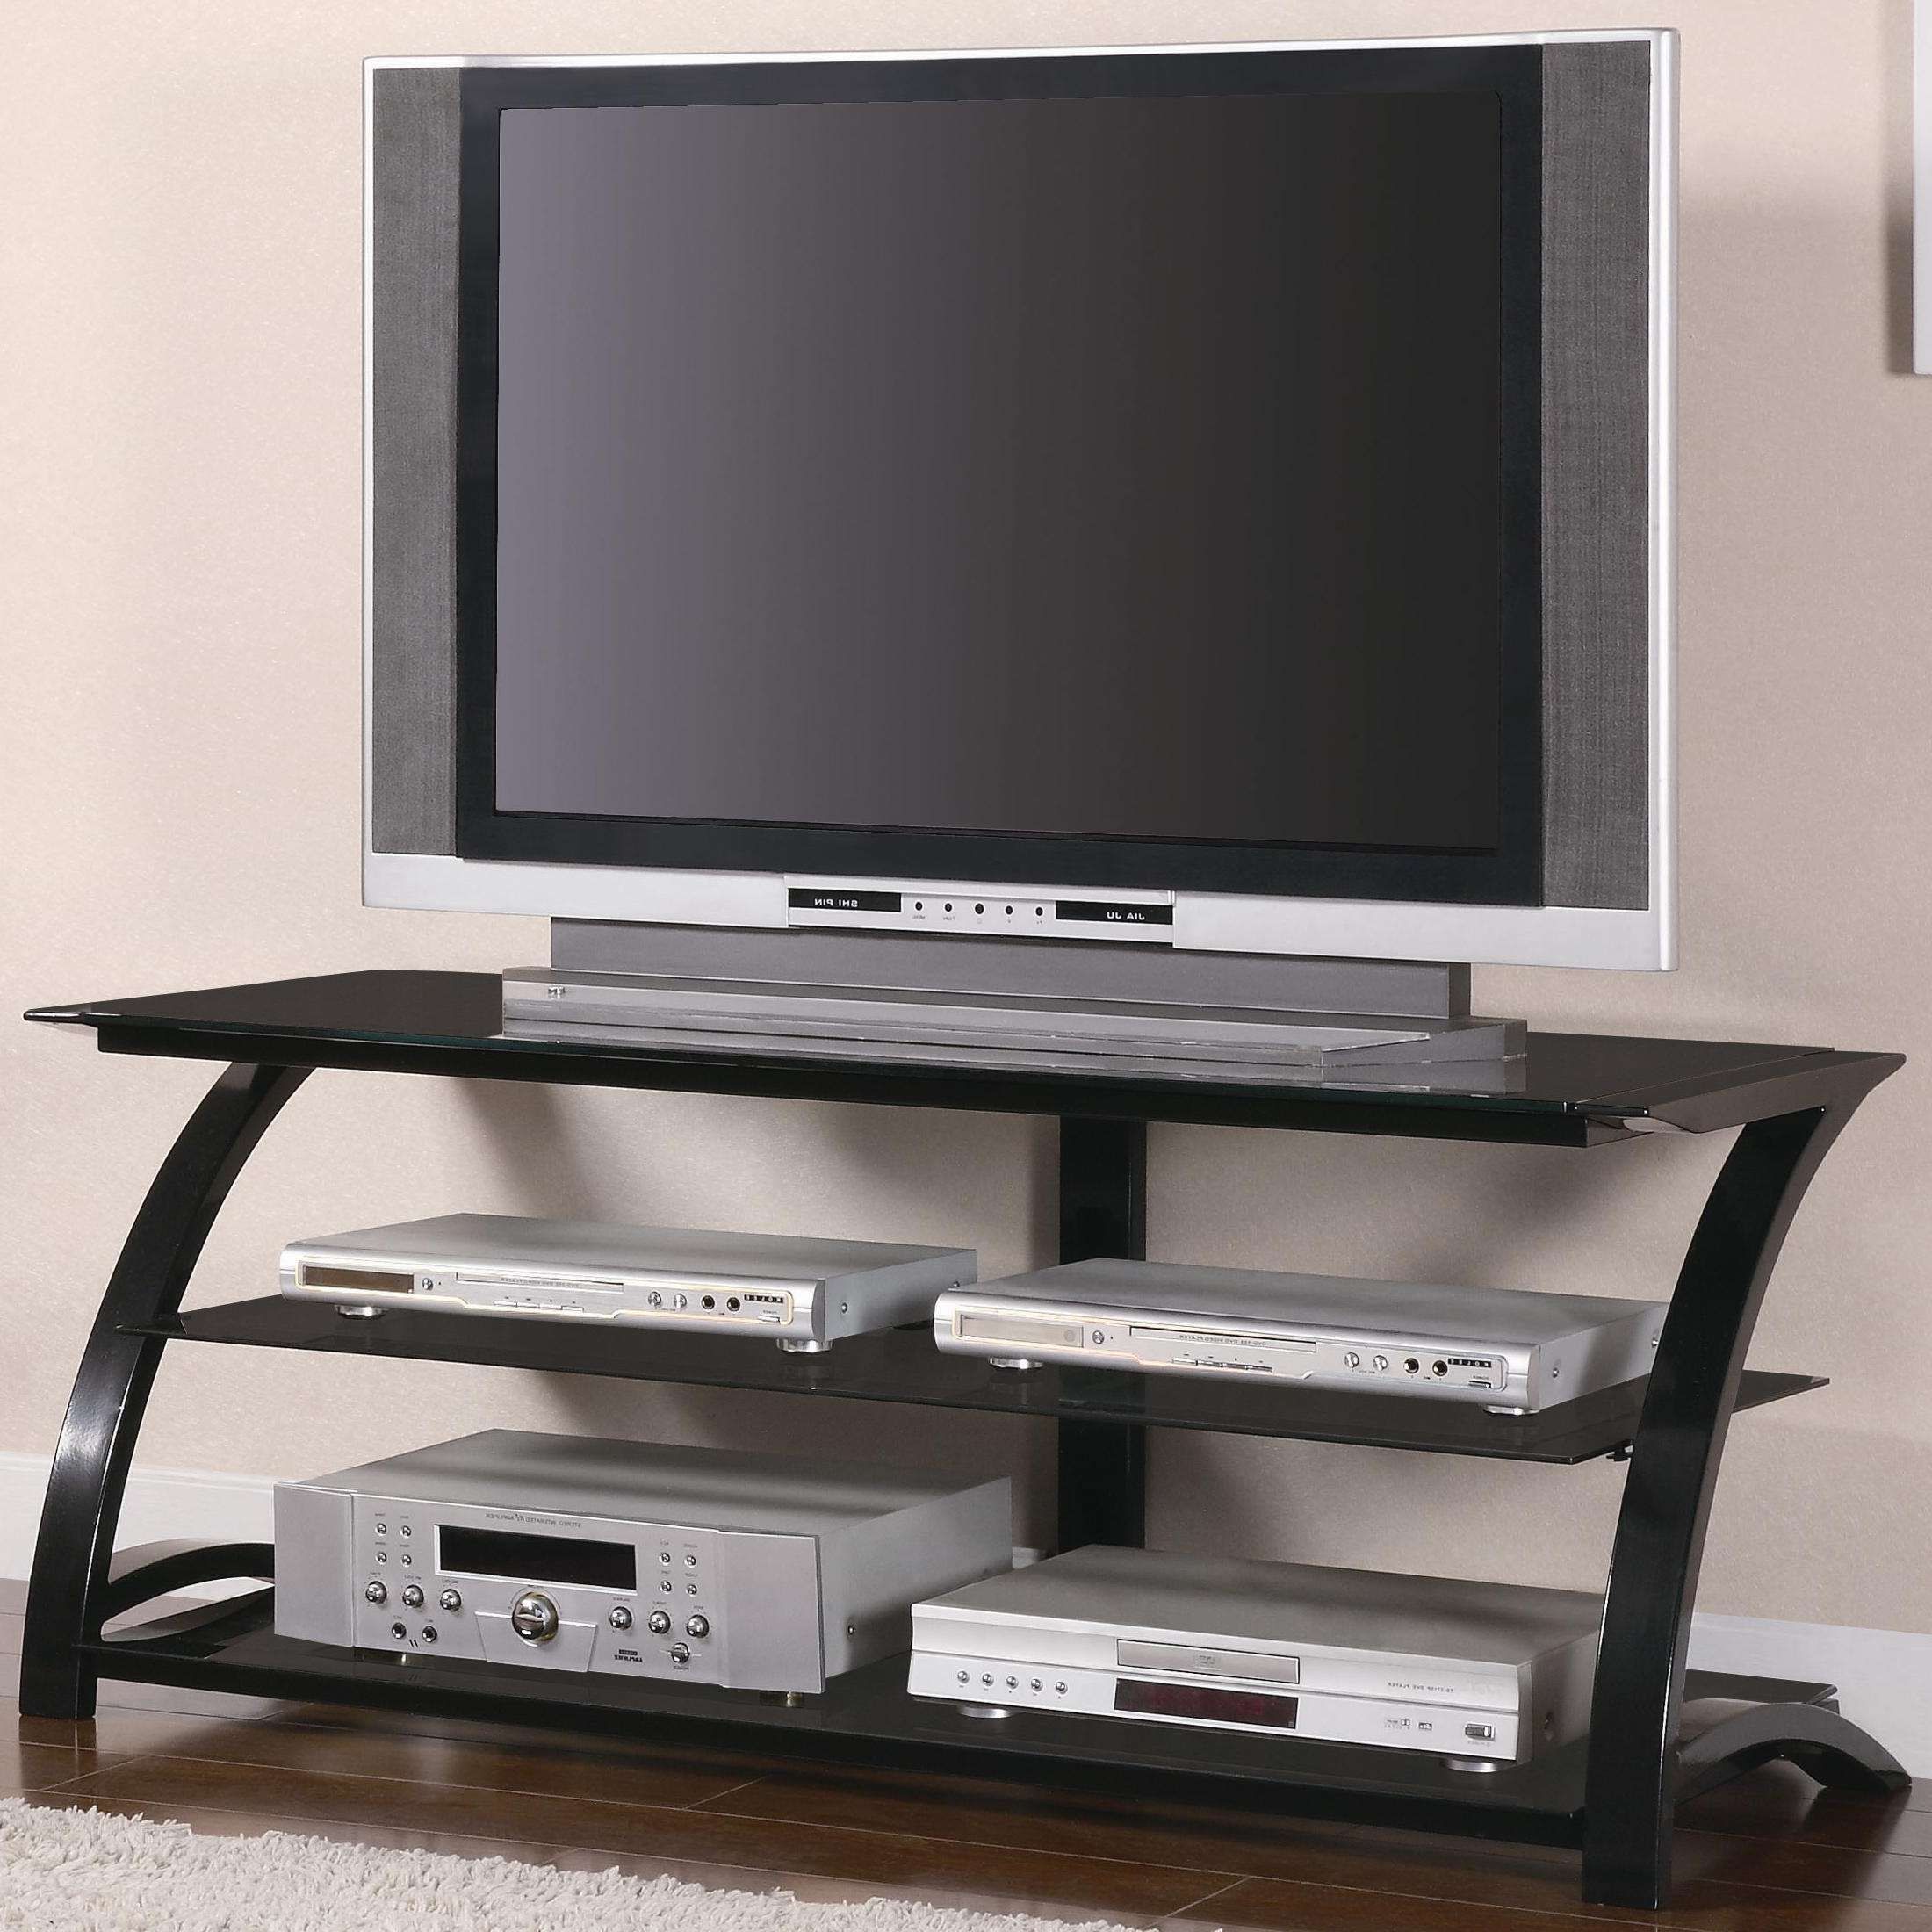 Coaster Tv Stands Contemporary Metal And Glass Media Console Intended For Contemporary Glass Tv Stands (View 1 of 15)